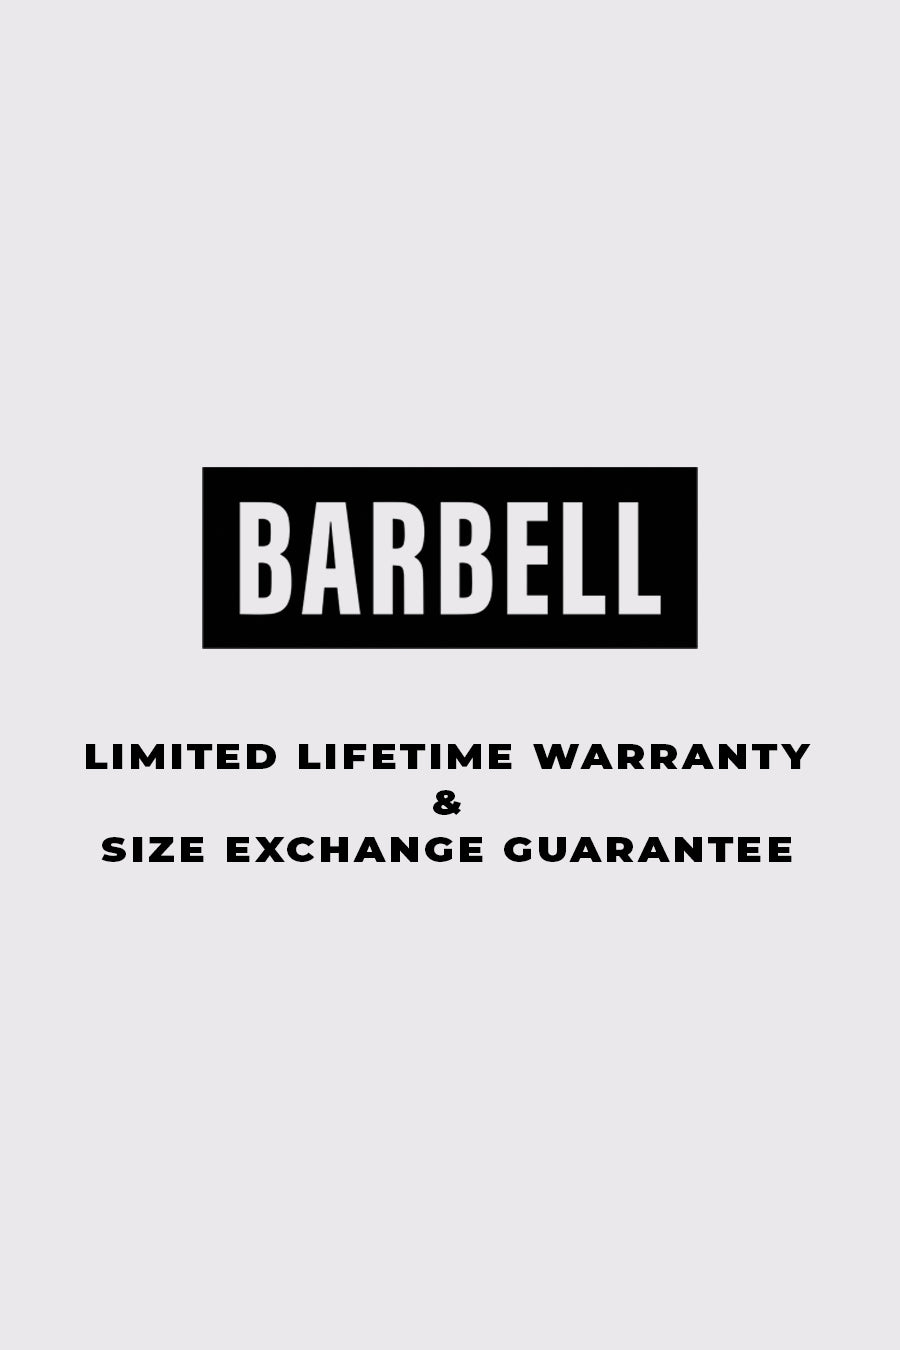 why we made the Limited Lifetime Warranty & Size Exchange Guarantee